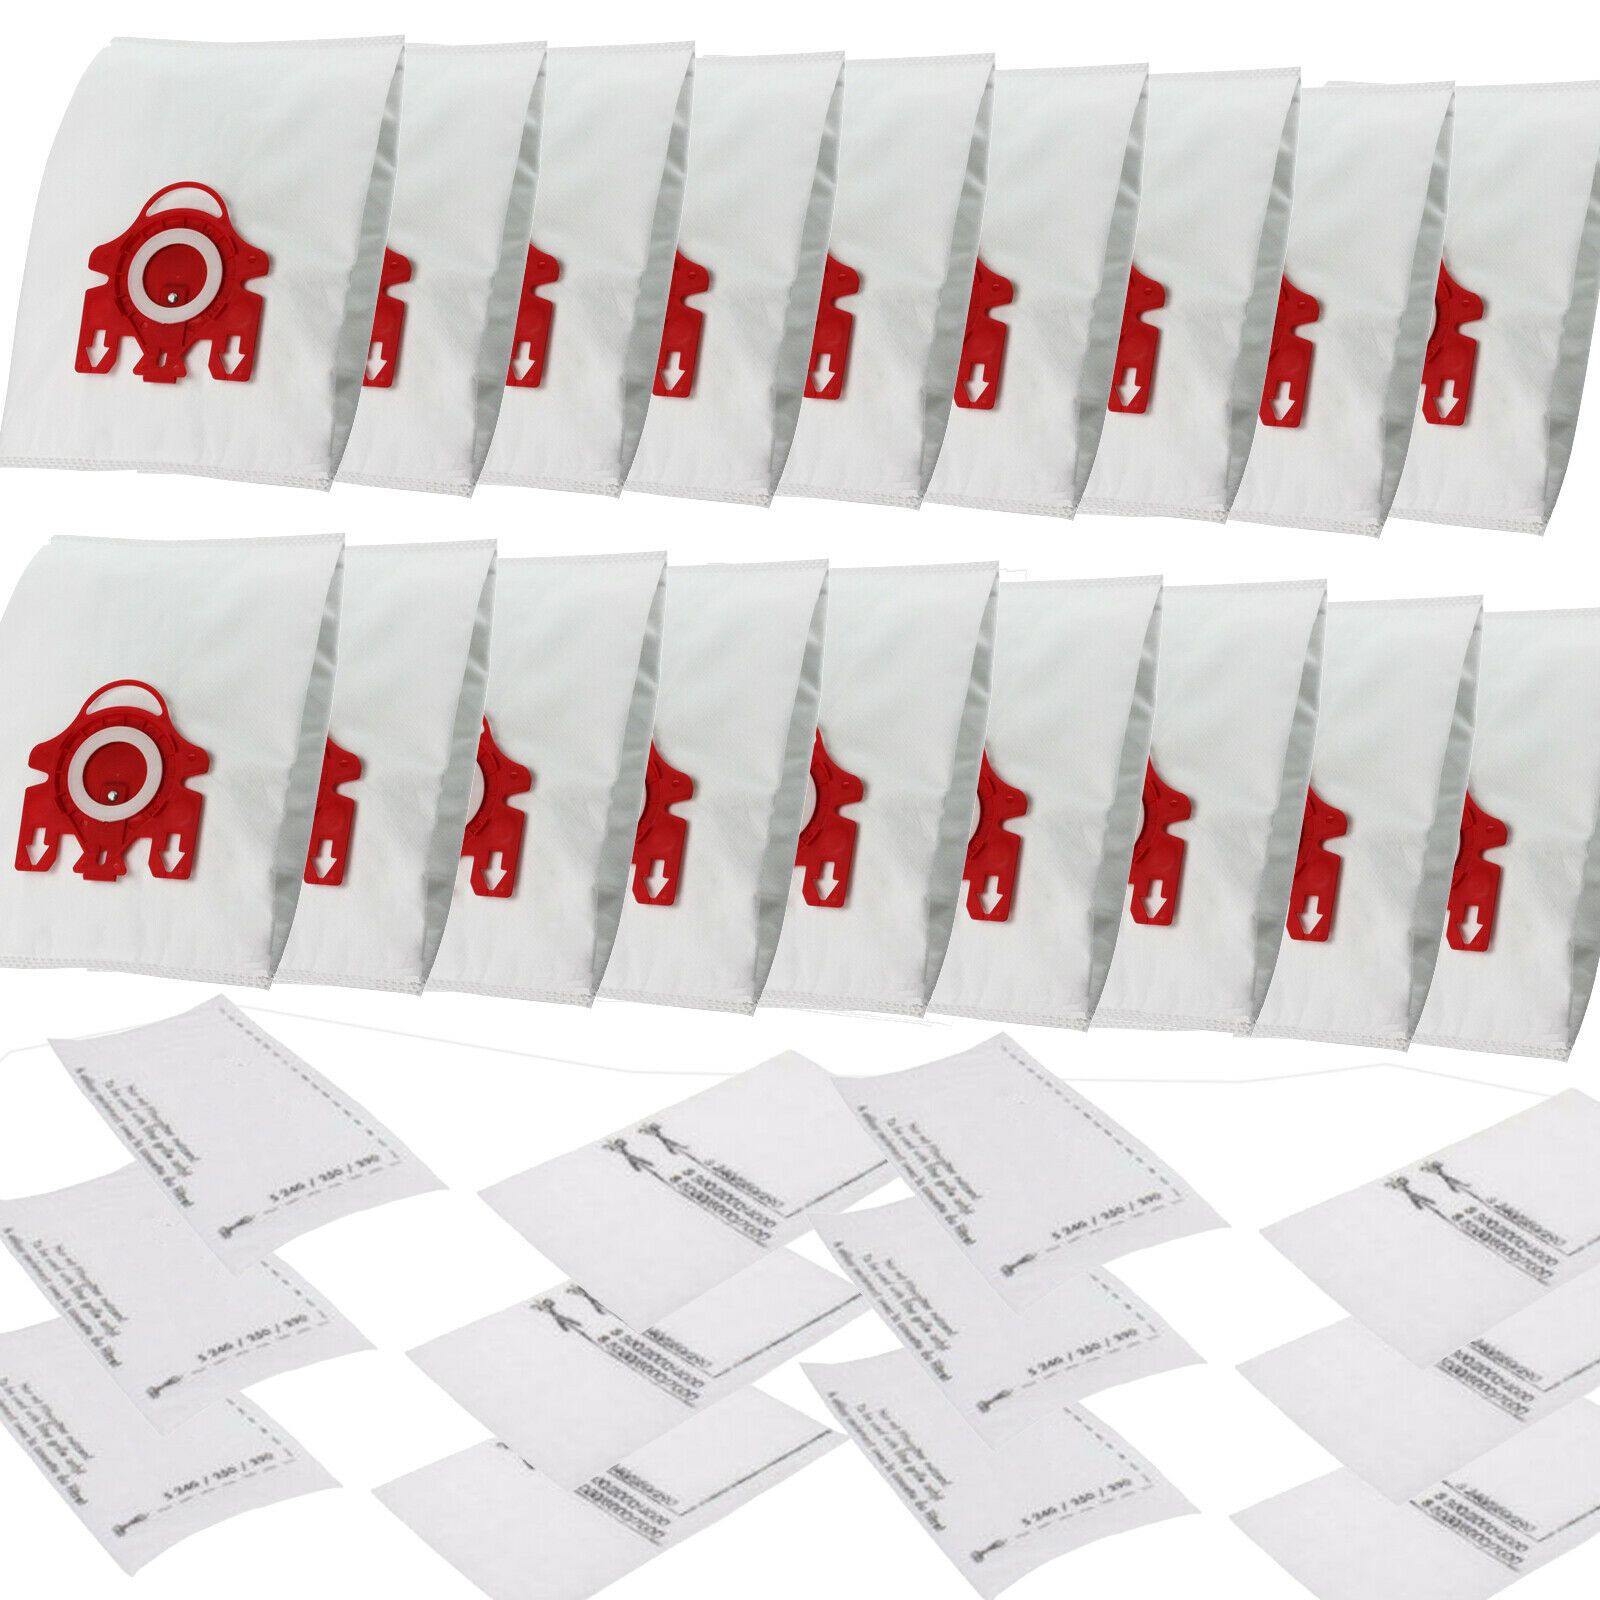 18 Vacuum Dust Bags & 12 Filters For Miele FJM 3D COMPACT C1 C2 S4 S6 S290 S381 Sparesbarn